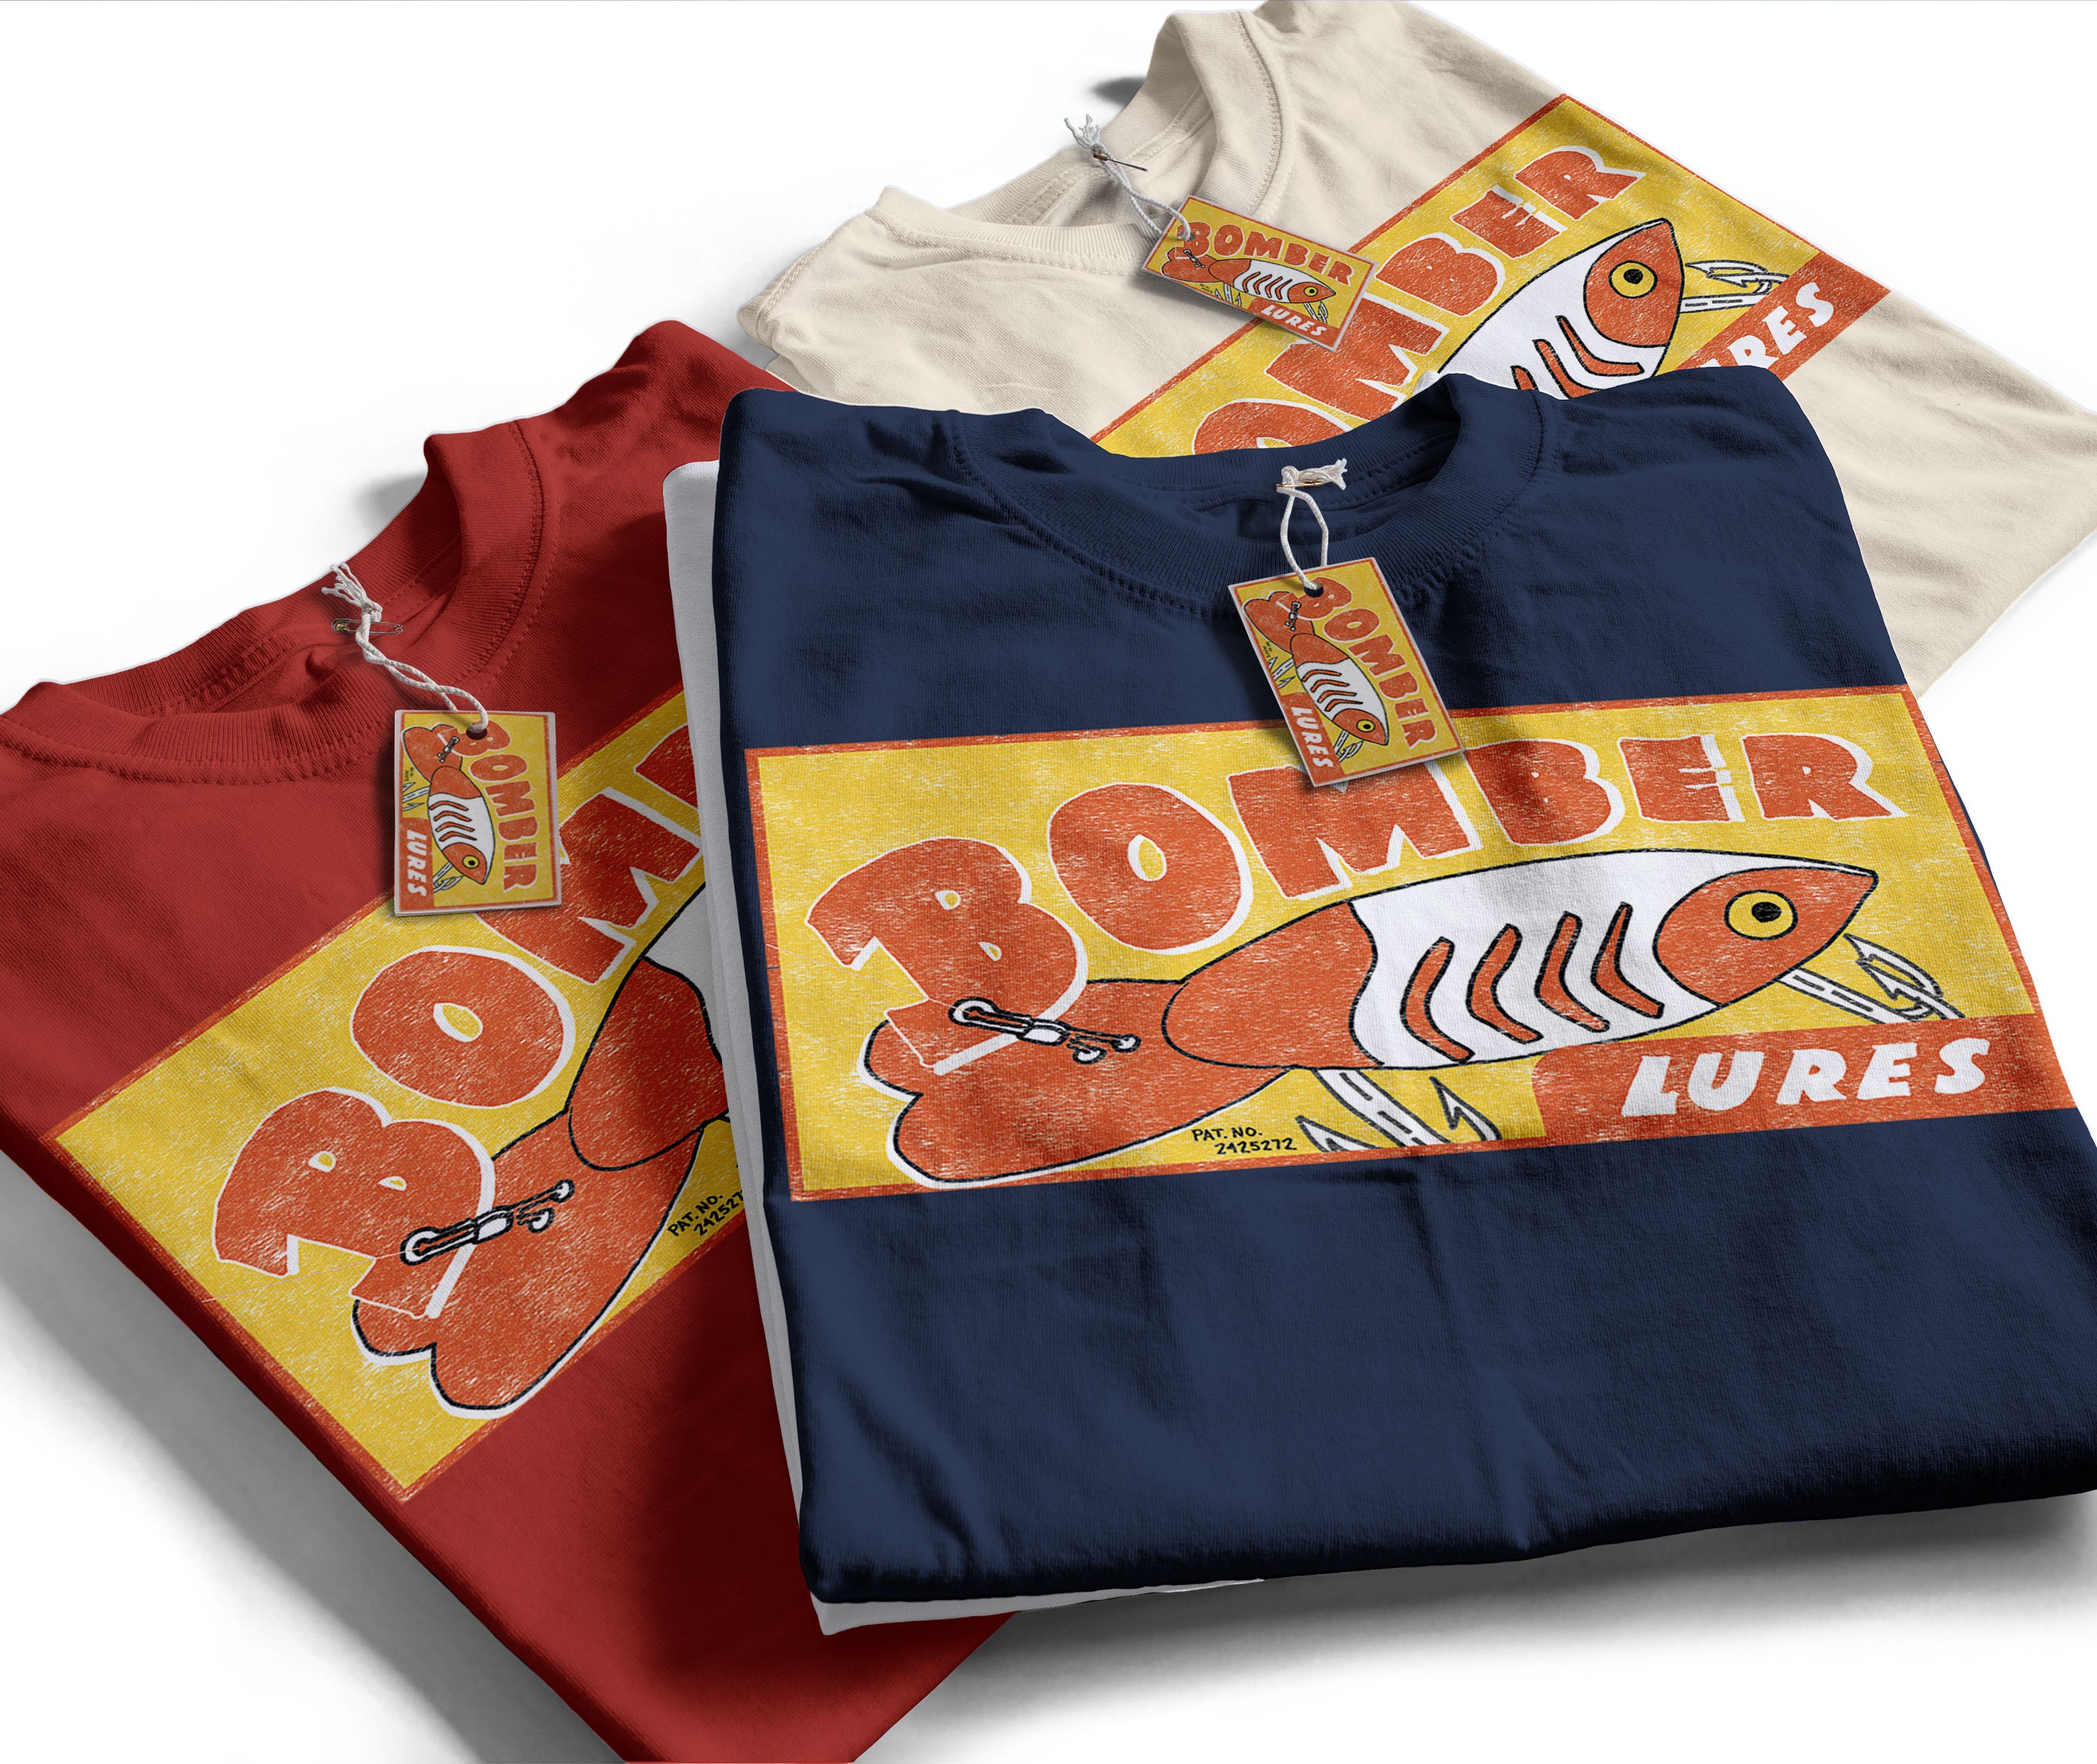 Bomber Lures Vintage Fishing Tackle T-shirt Fishing Baits Shirt for Both  Men and Women -  Canada